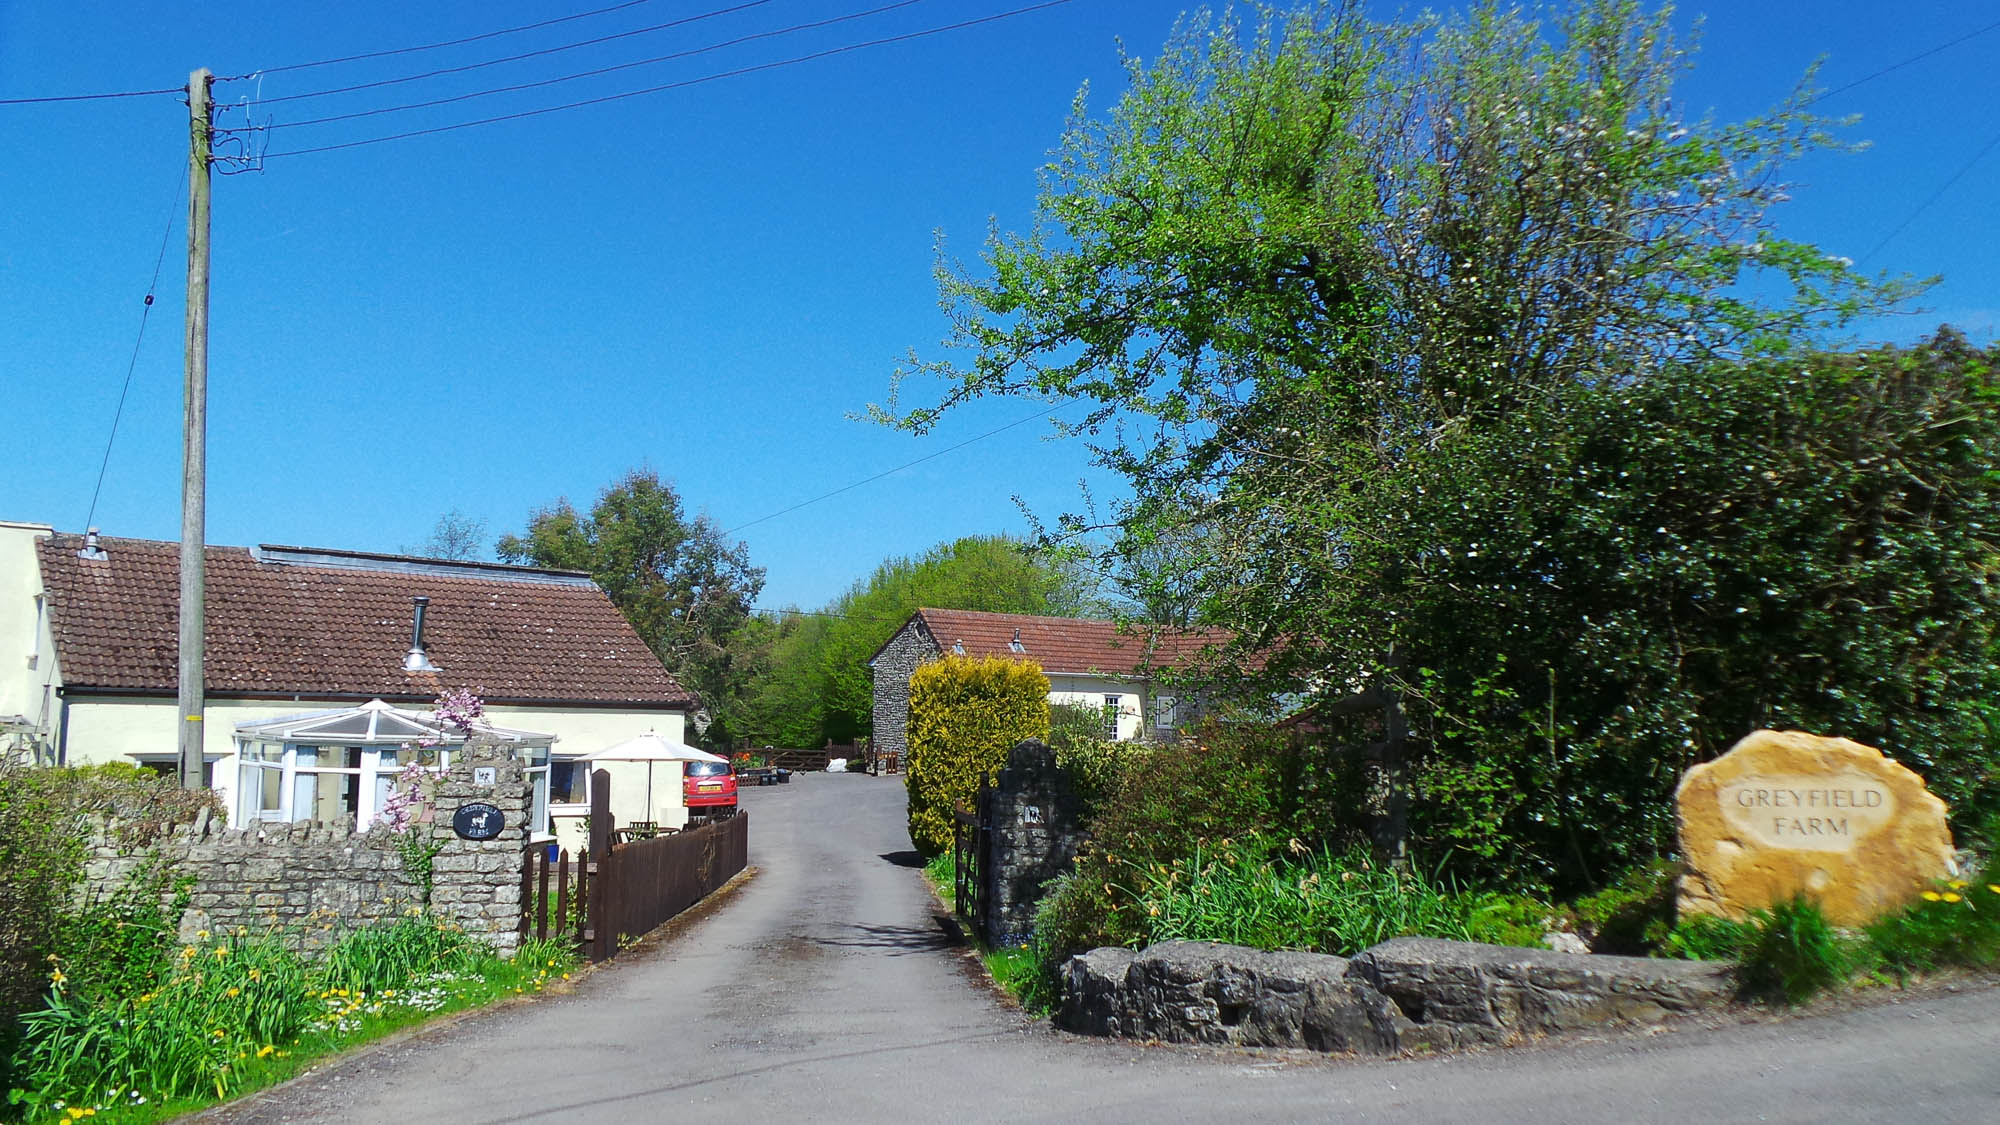 The driveway into Greyfield Farm Cottages, the signs say Greyfield Farm